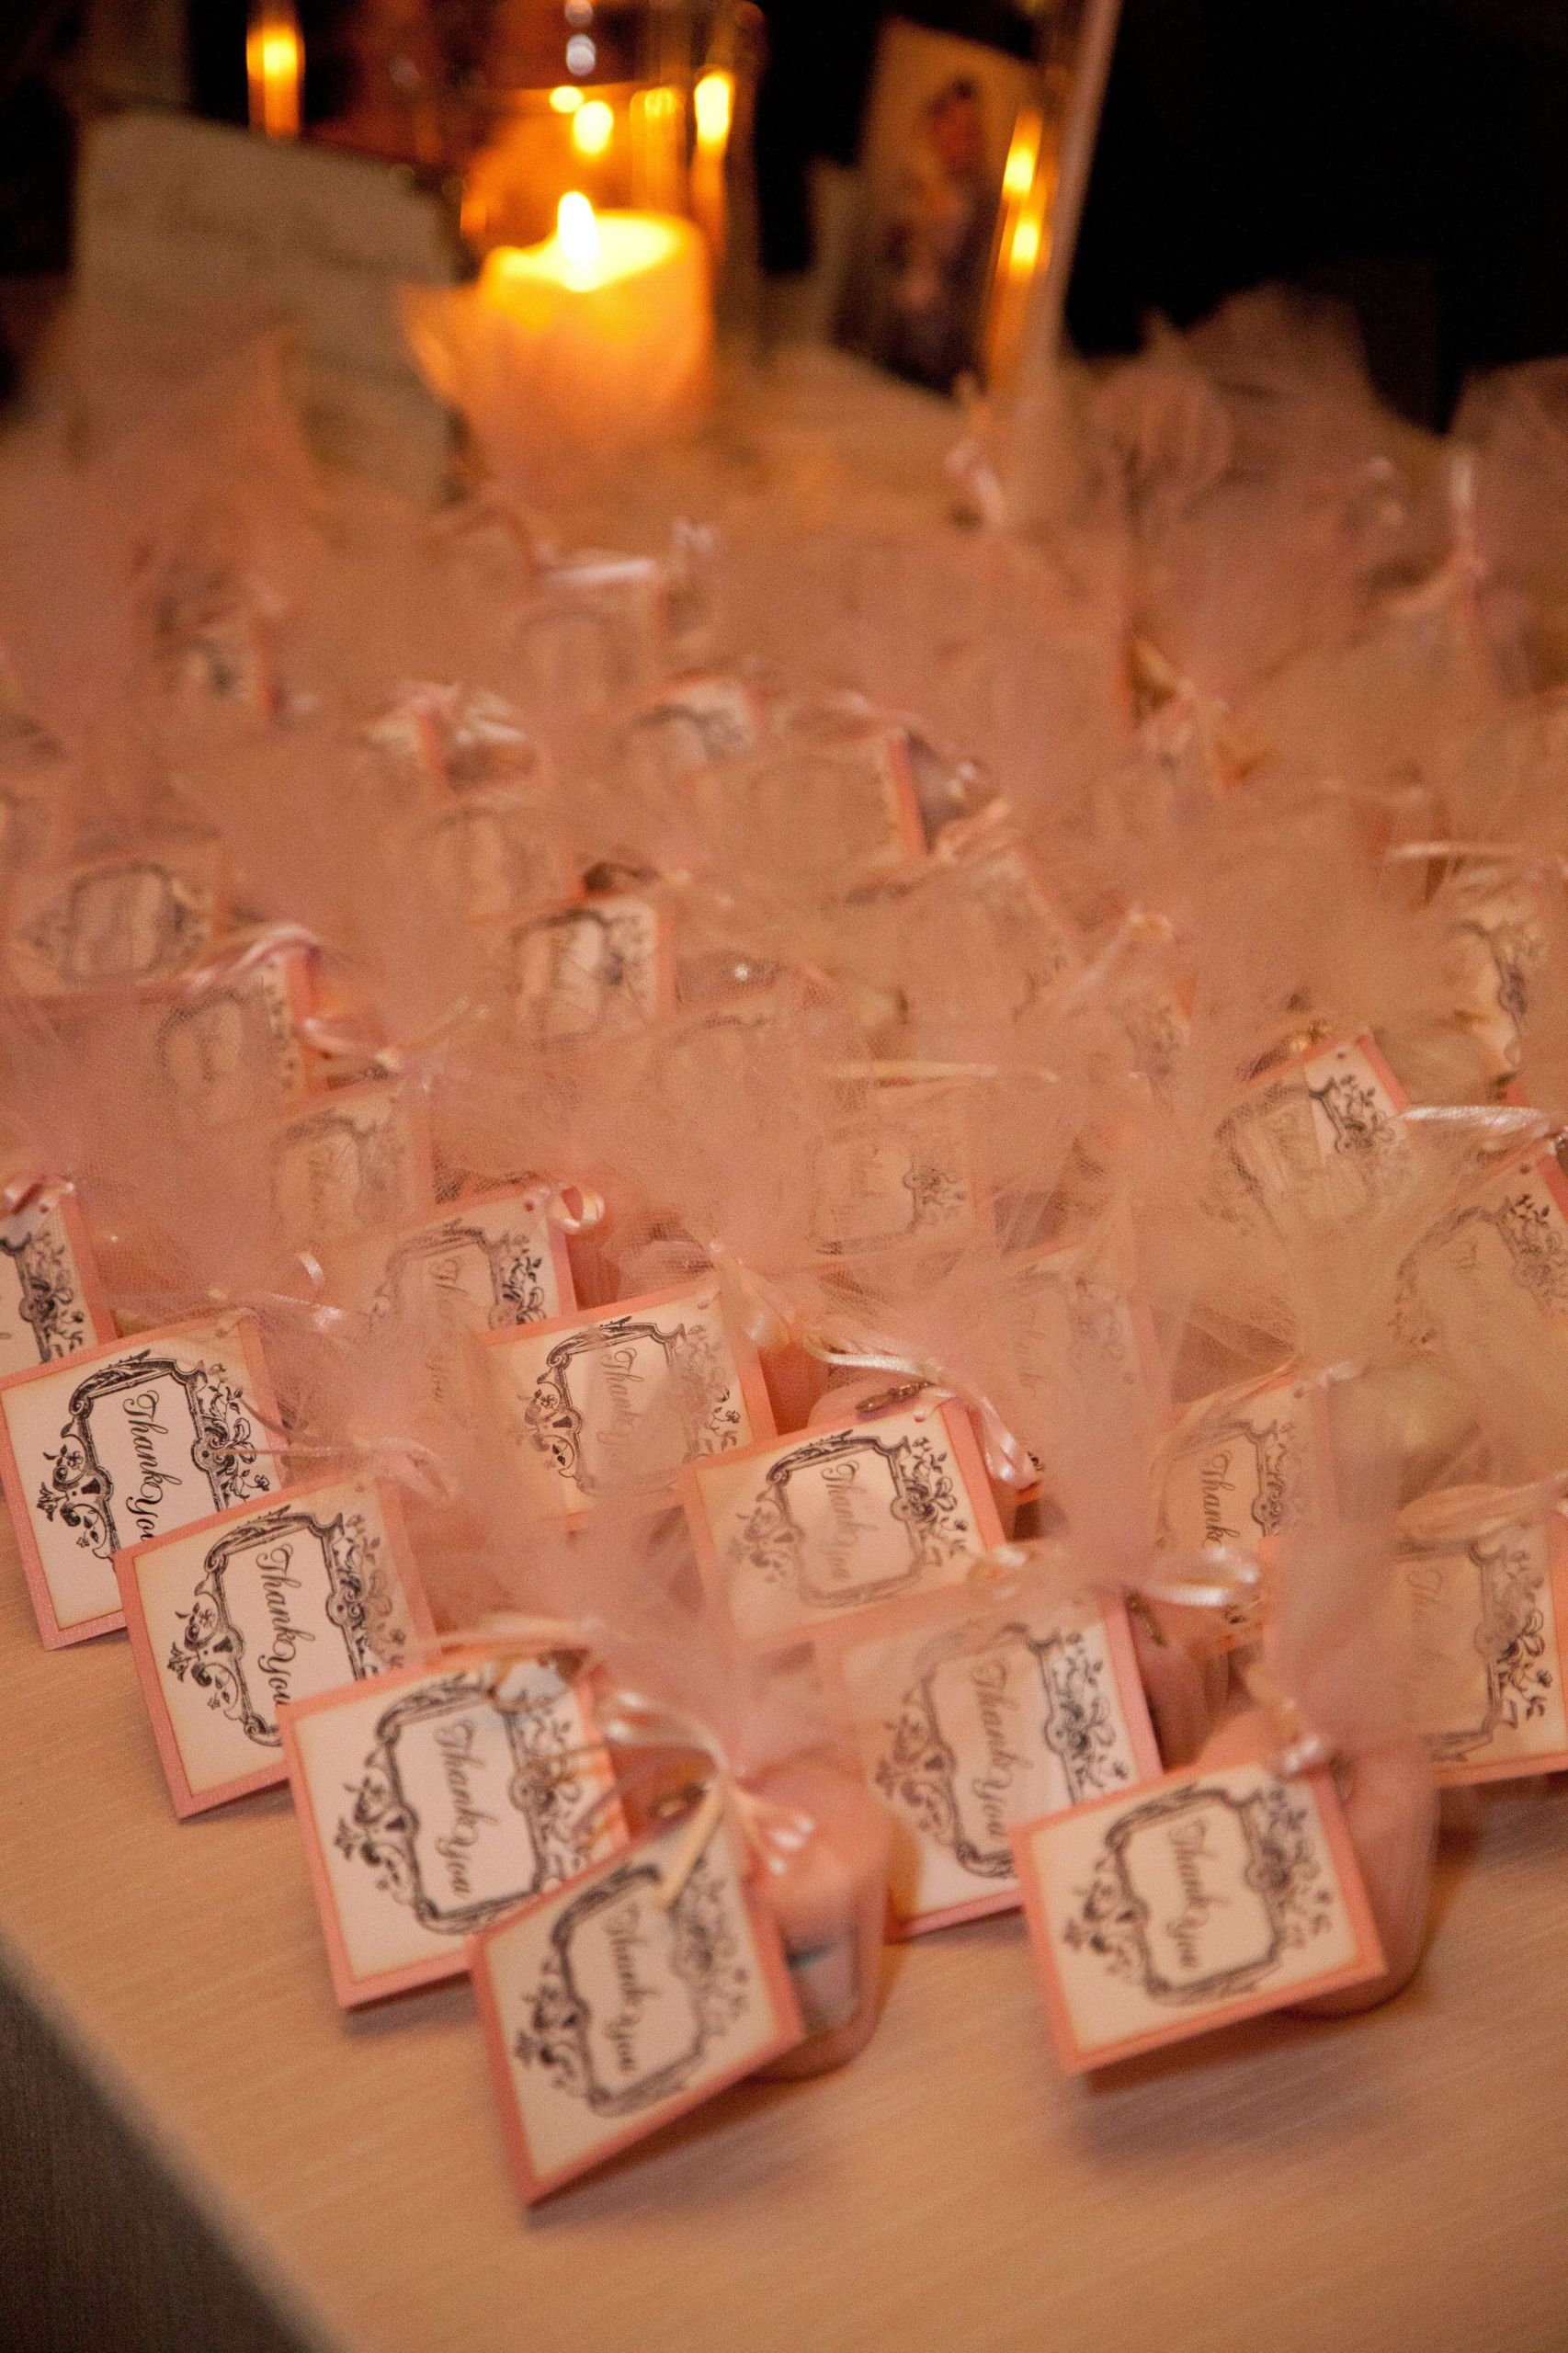 Yankee Candle Wedding Favors
 Our favors Yankee votive candles in colors coordinating w